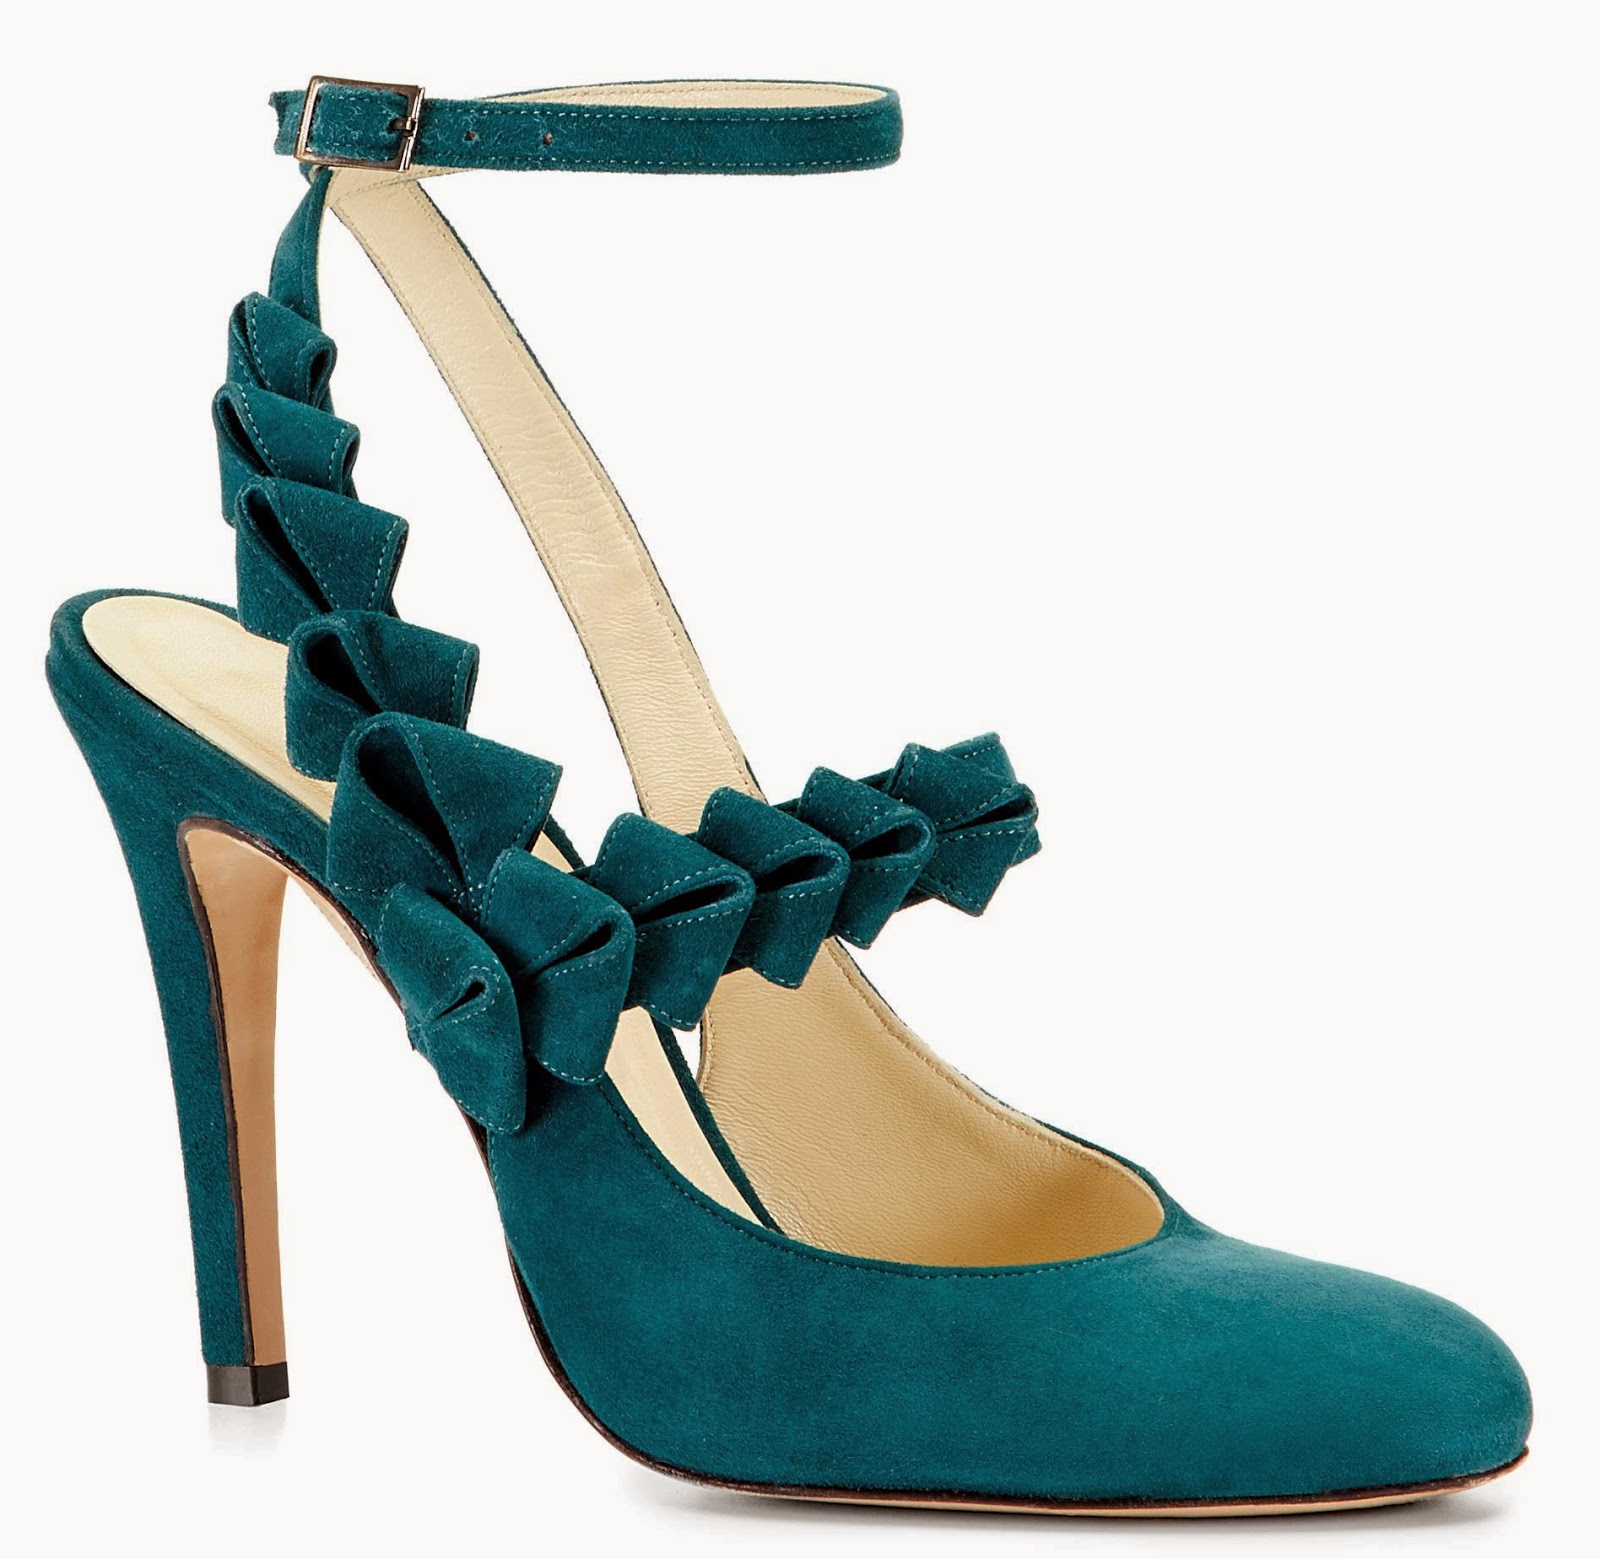 Shoe of the Day Sarah Flint Hayworth Pump SHOEOGRAPHY